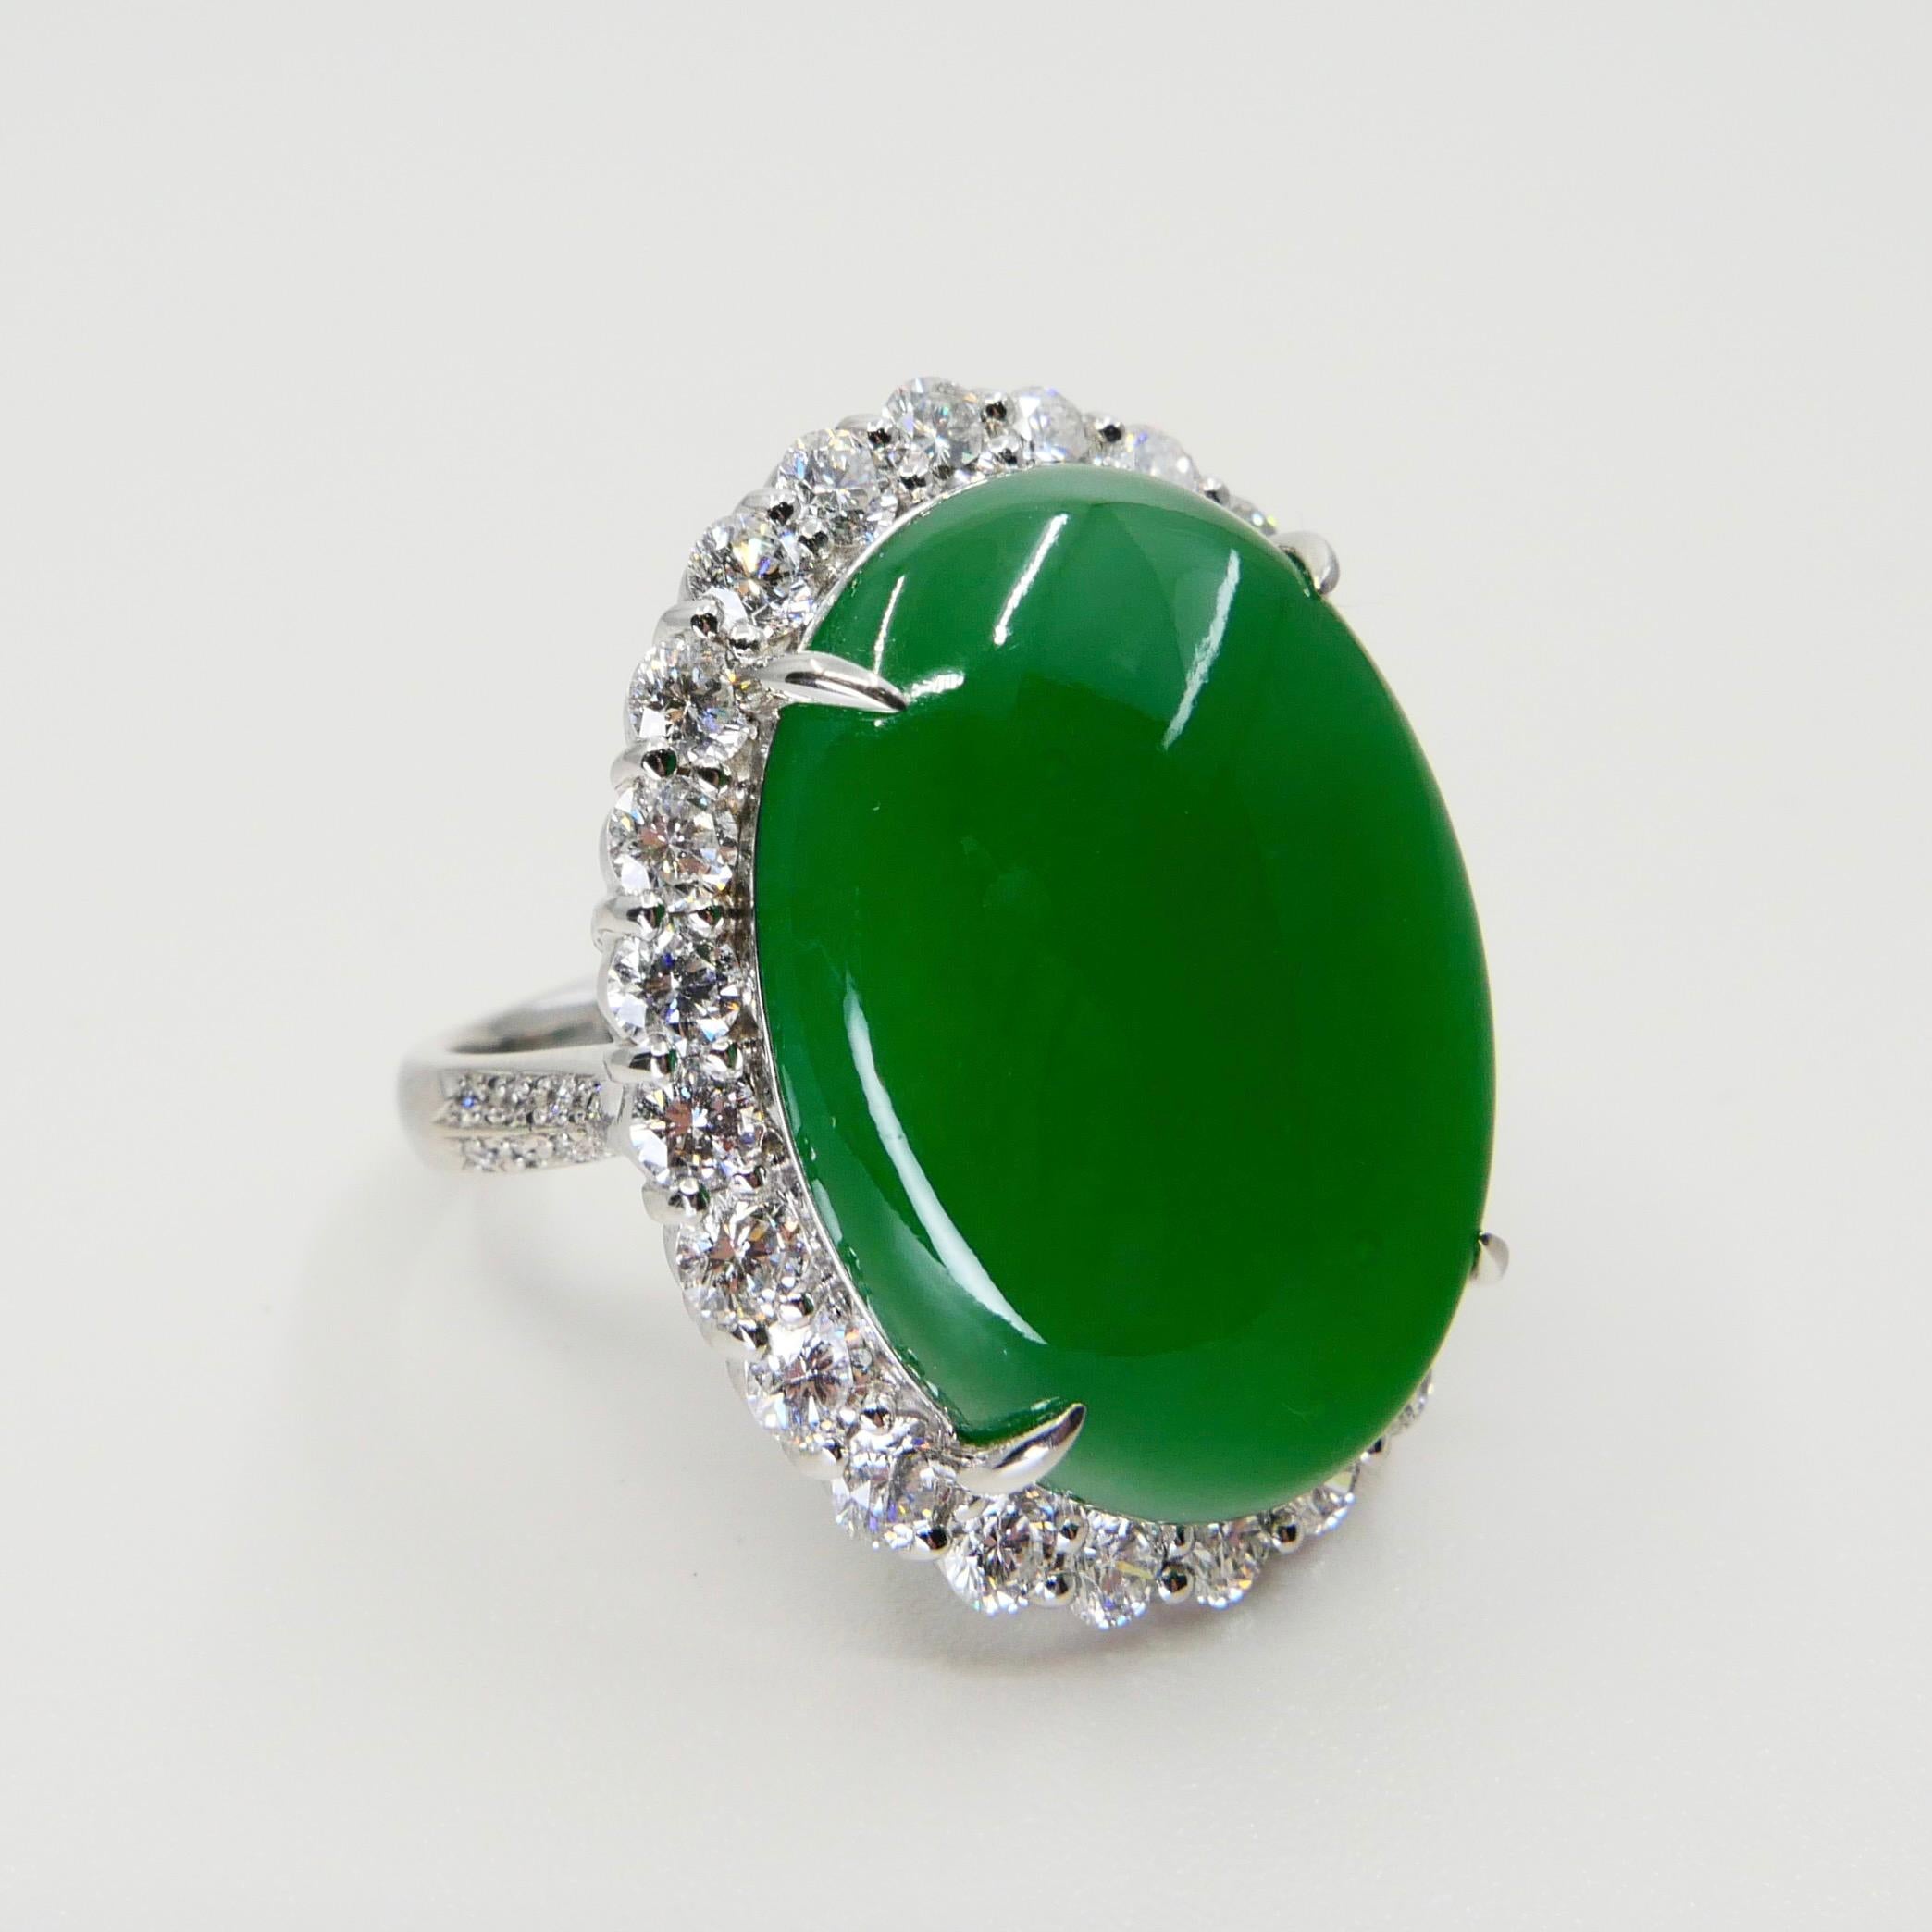 Certified 21 Cts Jade & Diamond Cocktail Ring, Intense Apple Green, Massive 11